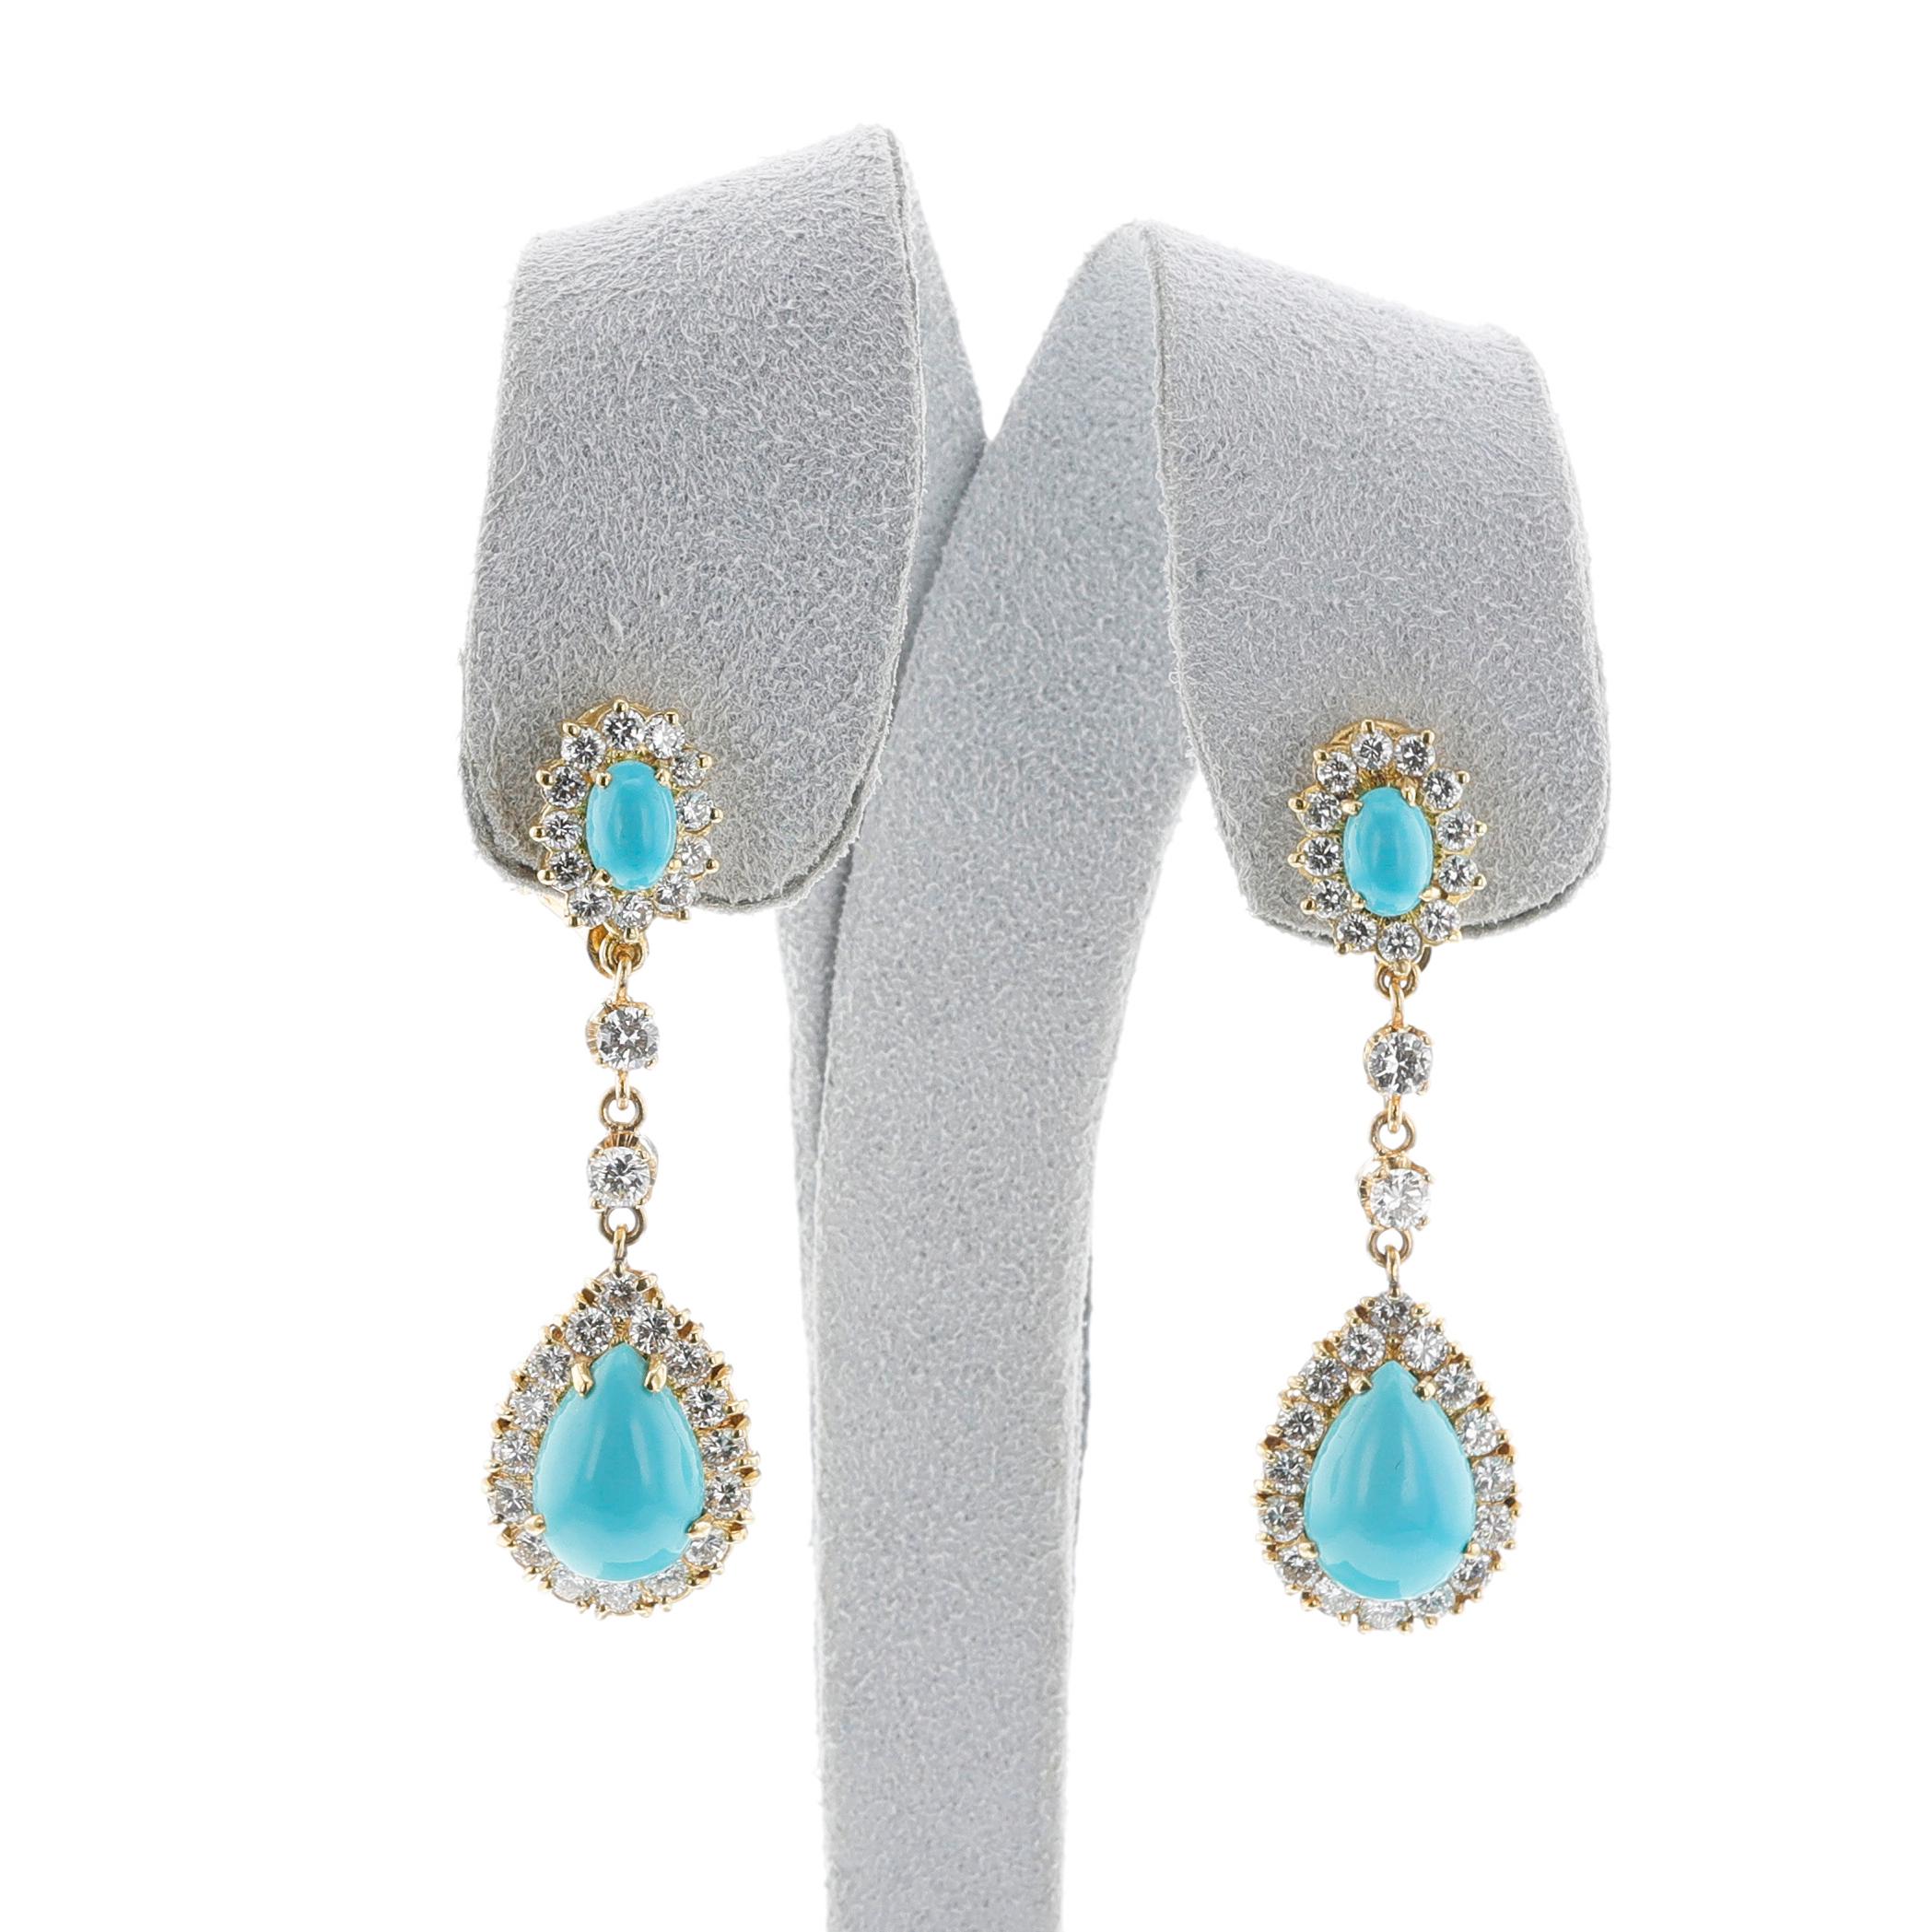 Turquoise Cabochon and Diamond Dangling Earrings made in 18k Yellow Gold. The diamonds estimated weight 2.25 carats, H-I color, VS-SI clarity. The length is 1 3/4 inches.

SKU: 1492-BTYJEJRT